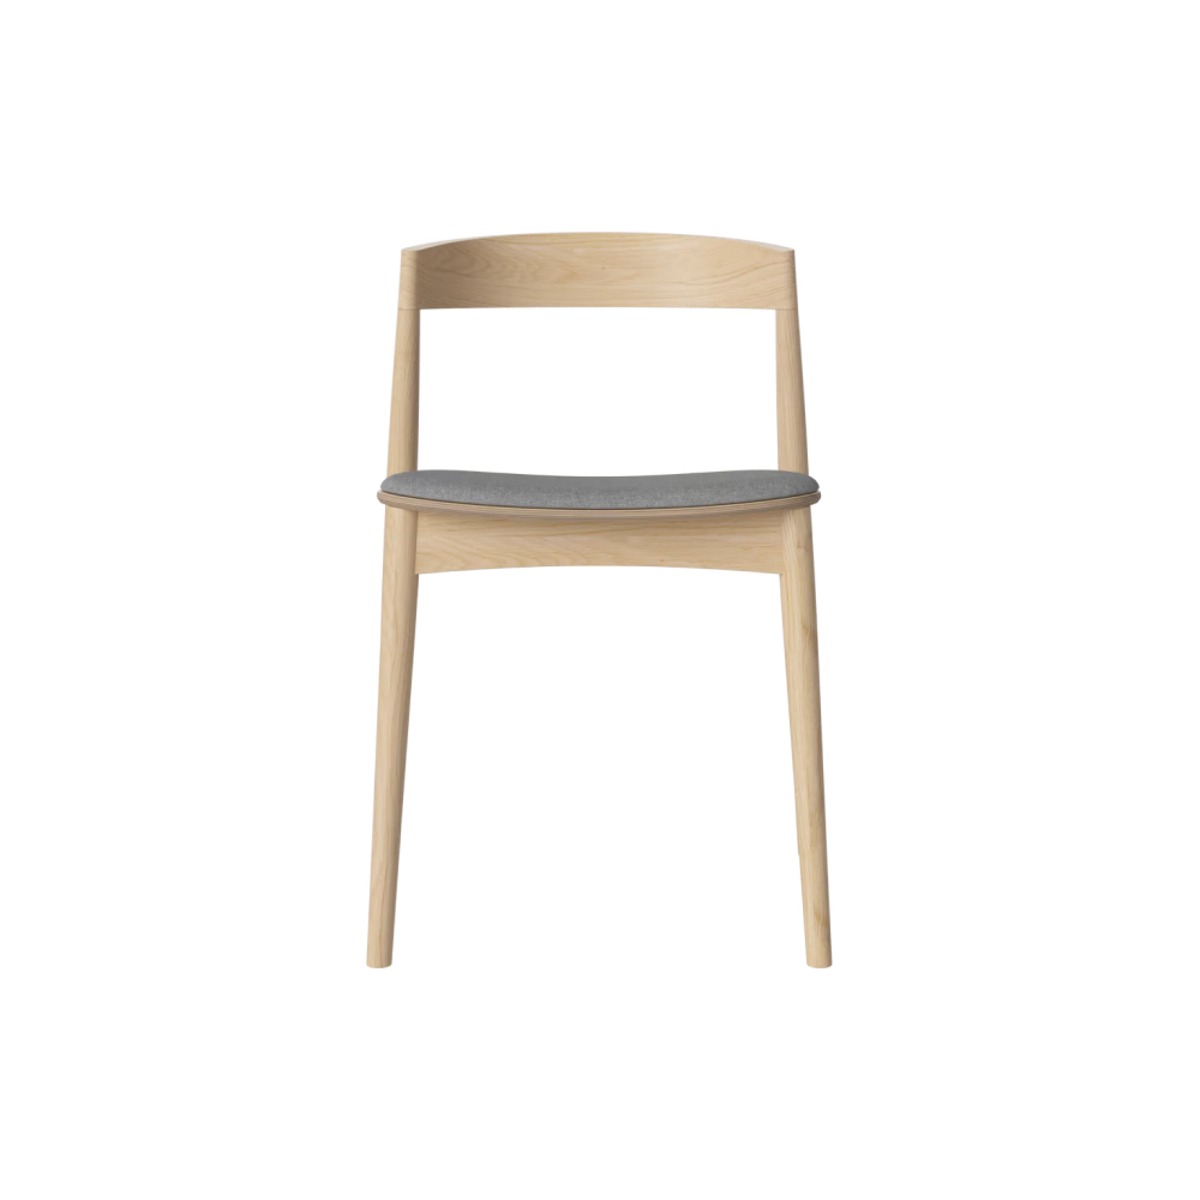 BOLIA Kite Dining Chair Upholstered